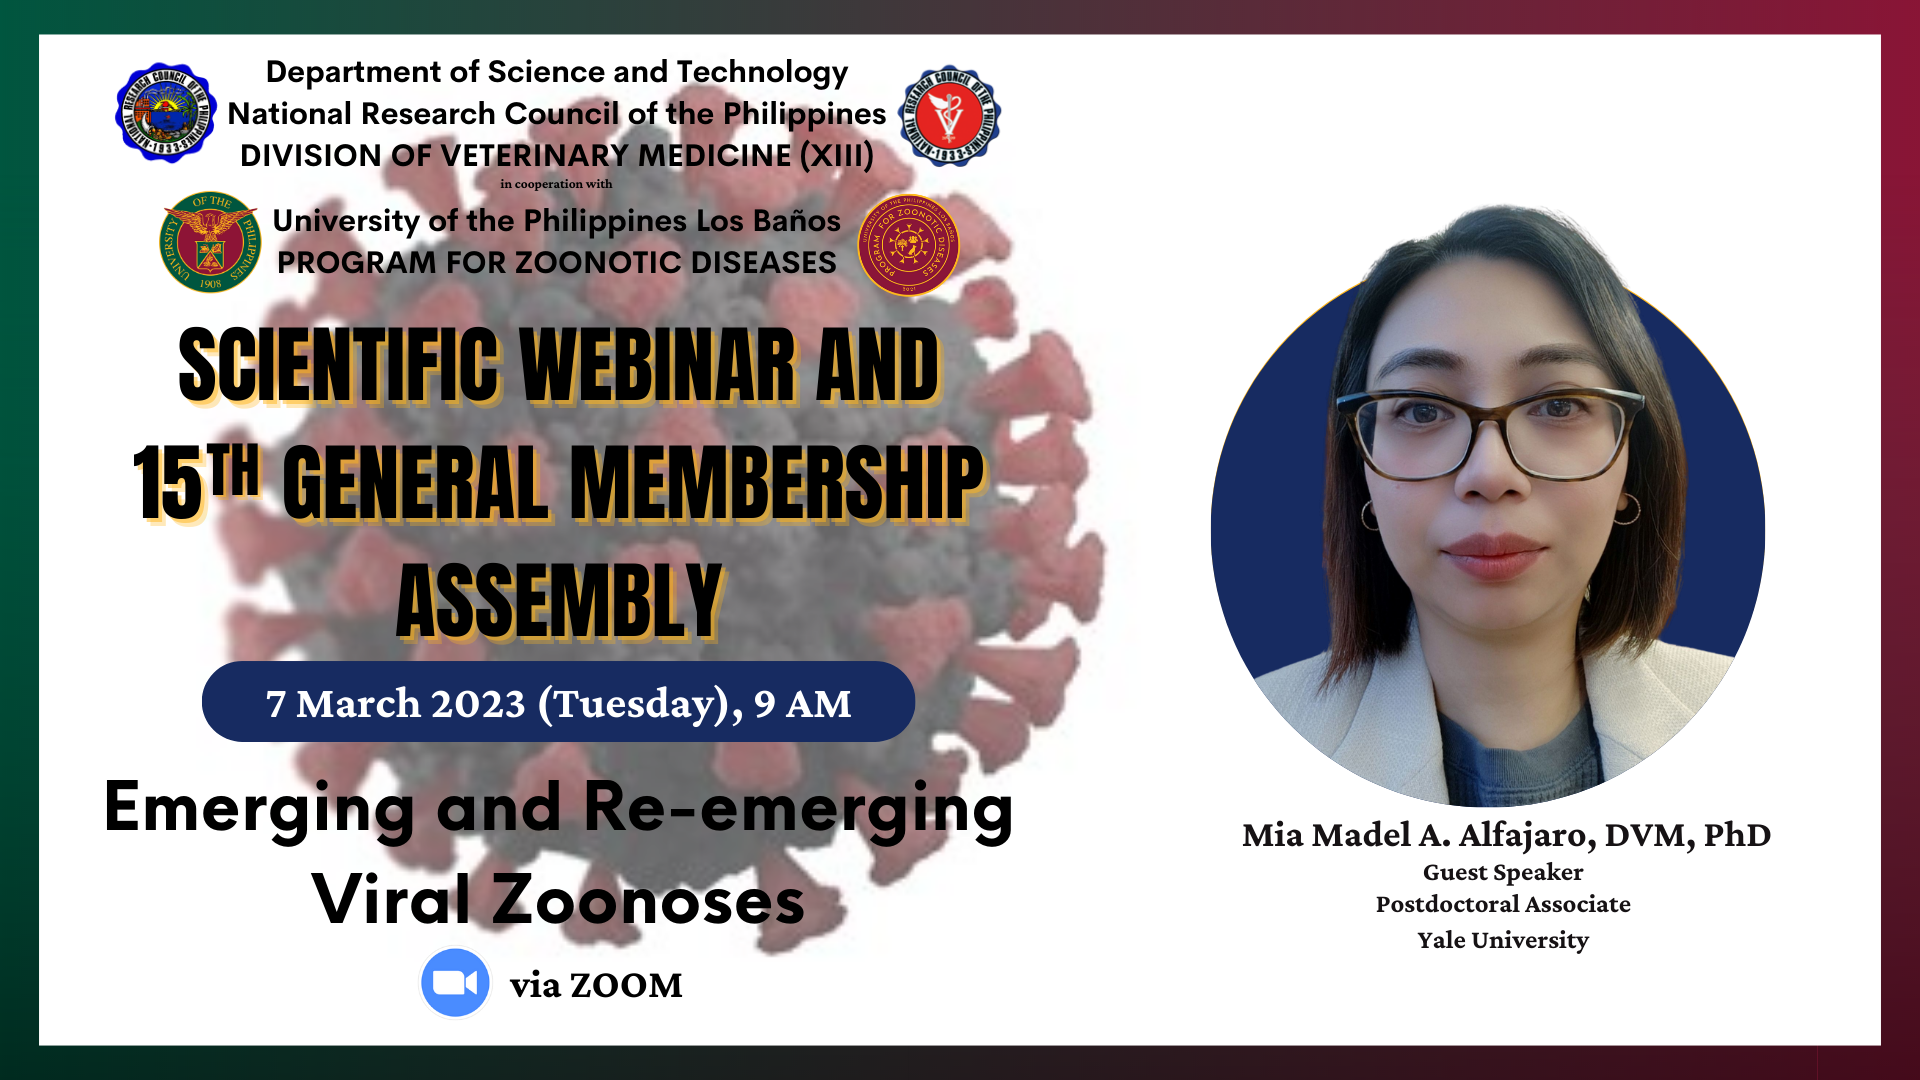 Webinar on Emerging and Re-Emerging Viral Zoonoses